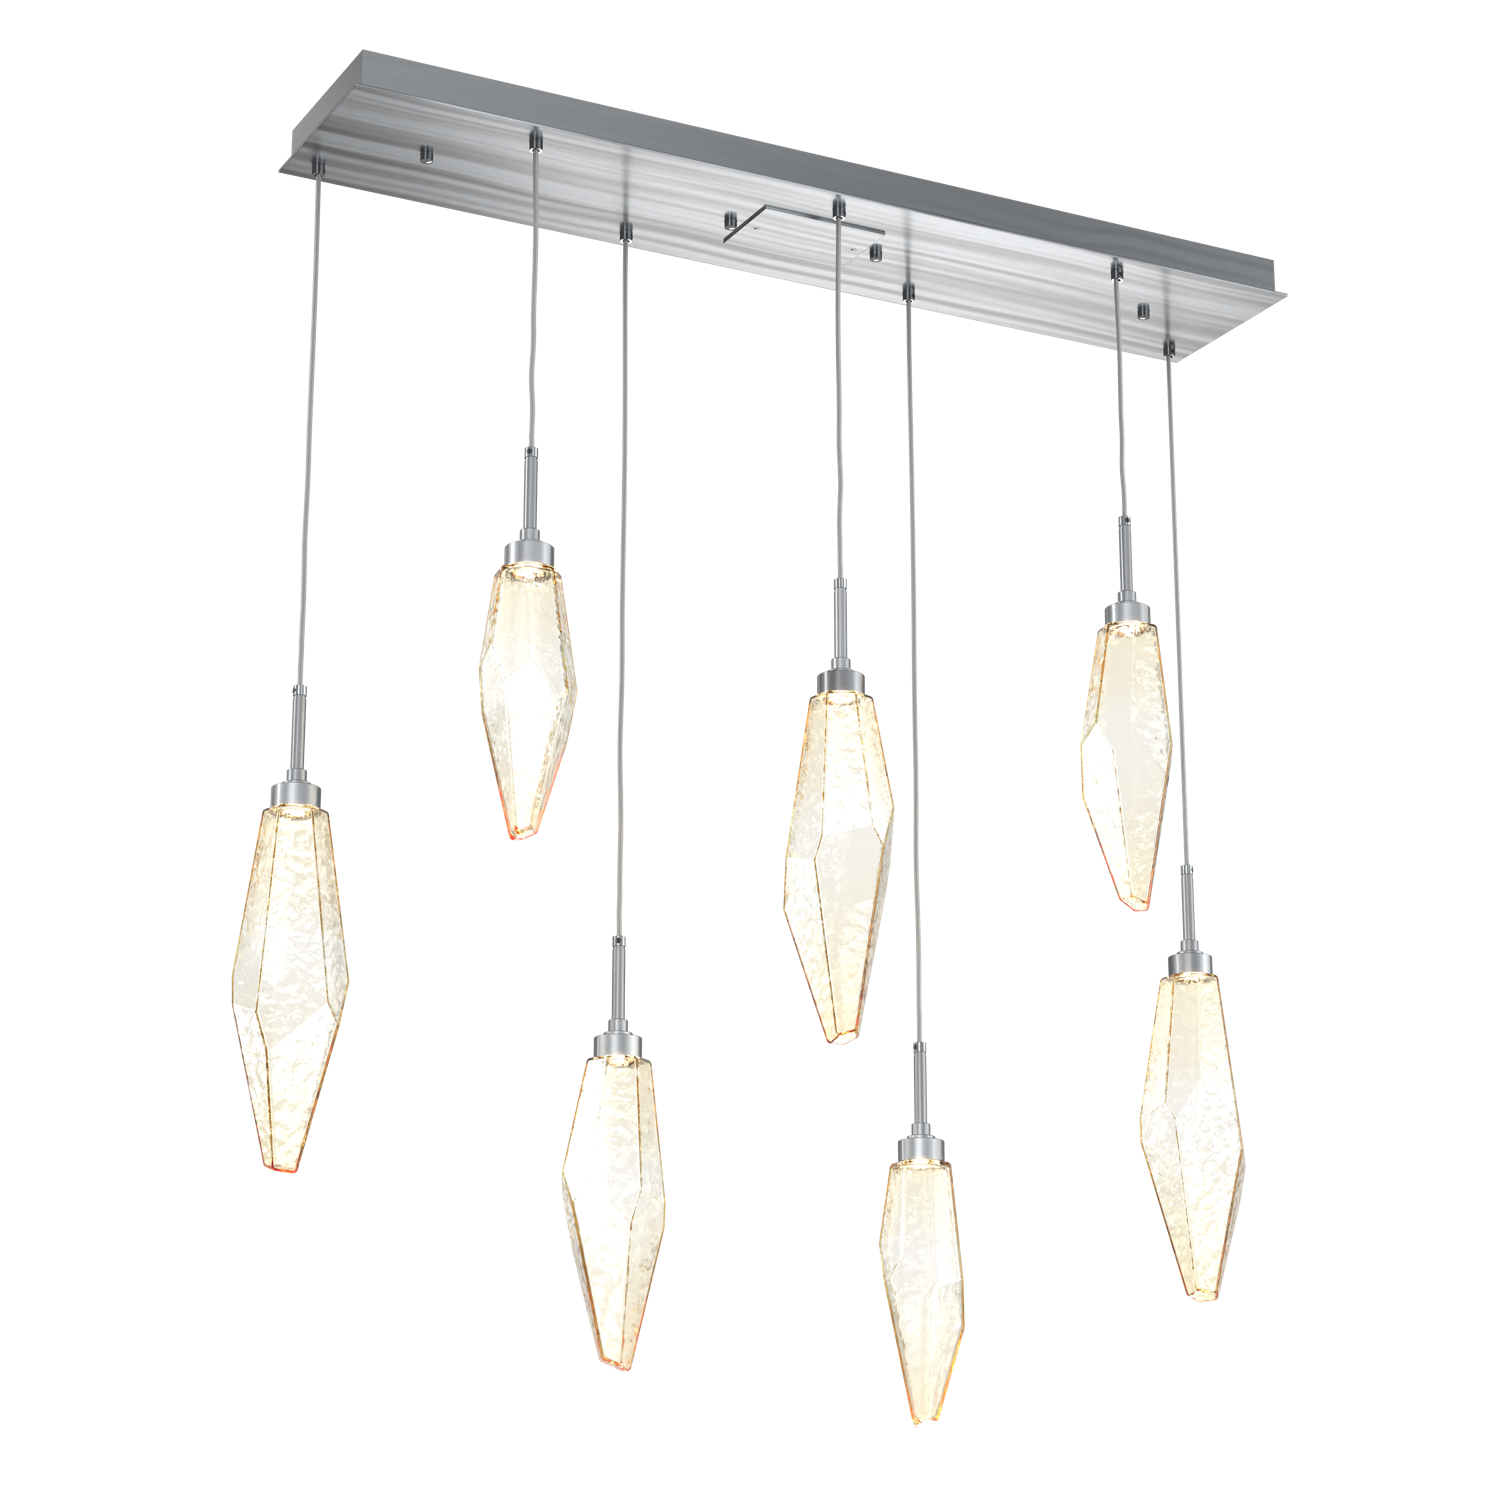 PLB0050-07-GM-CA-Hammerton-Studio-Rock-Crystal-7-light-linear-pendant-chandelier-with-gunmetal-finish-and-chilled-amber-blown-glass-shades-and-LED-lamping